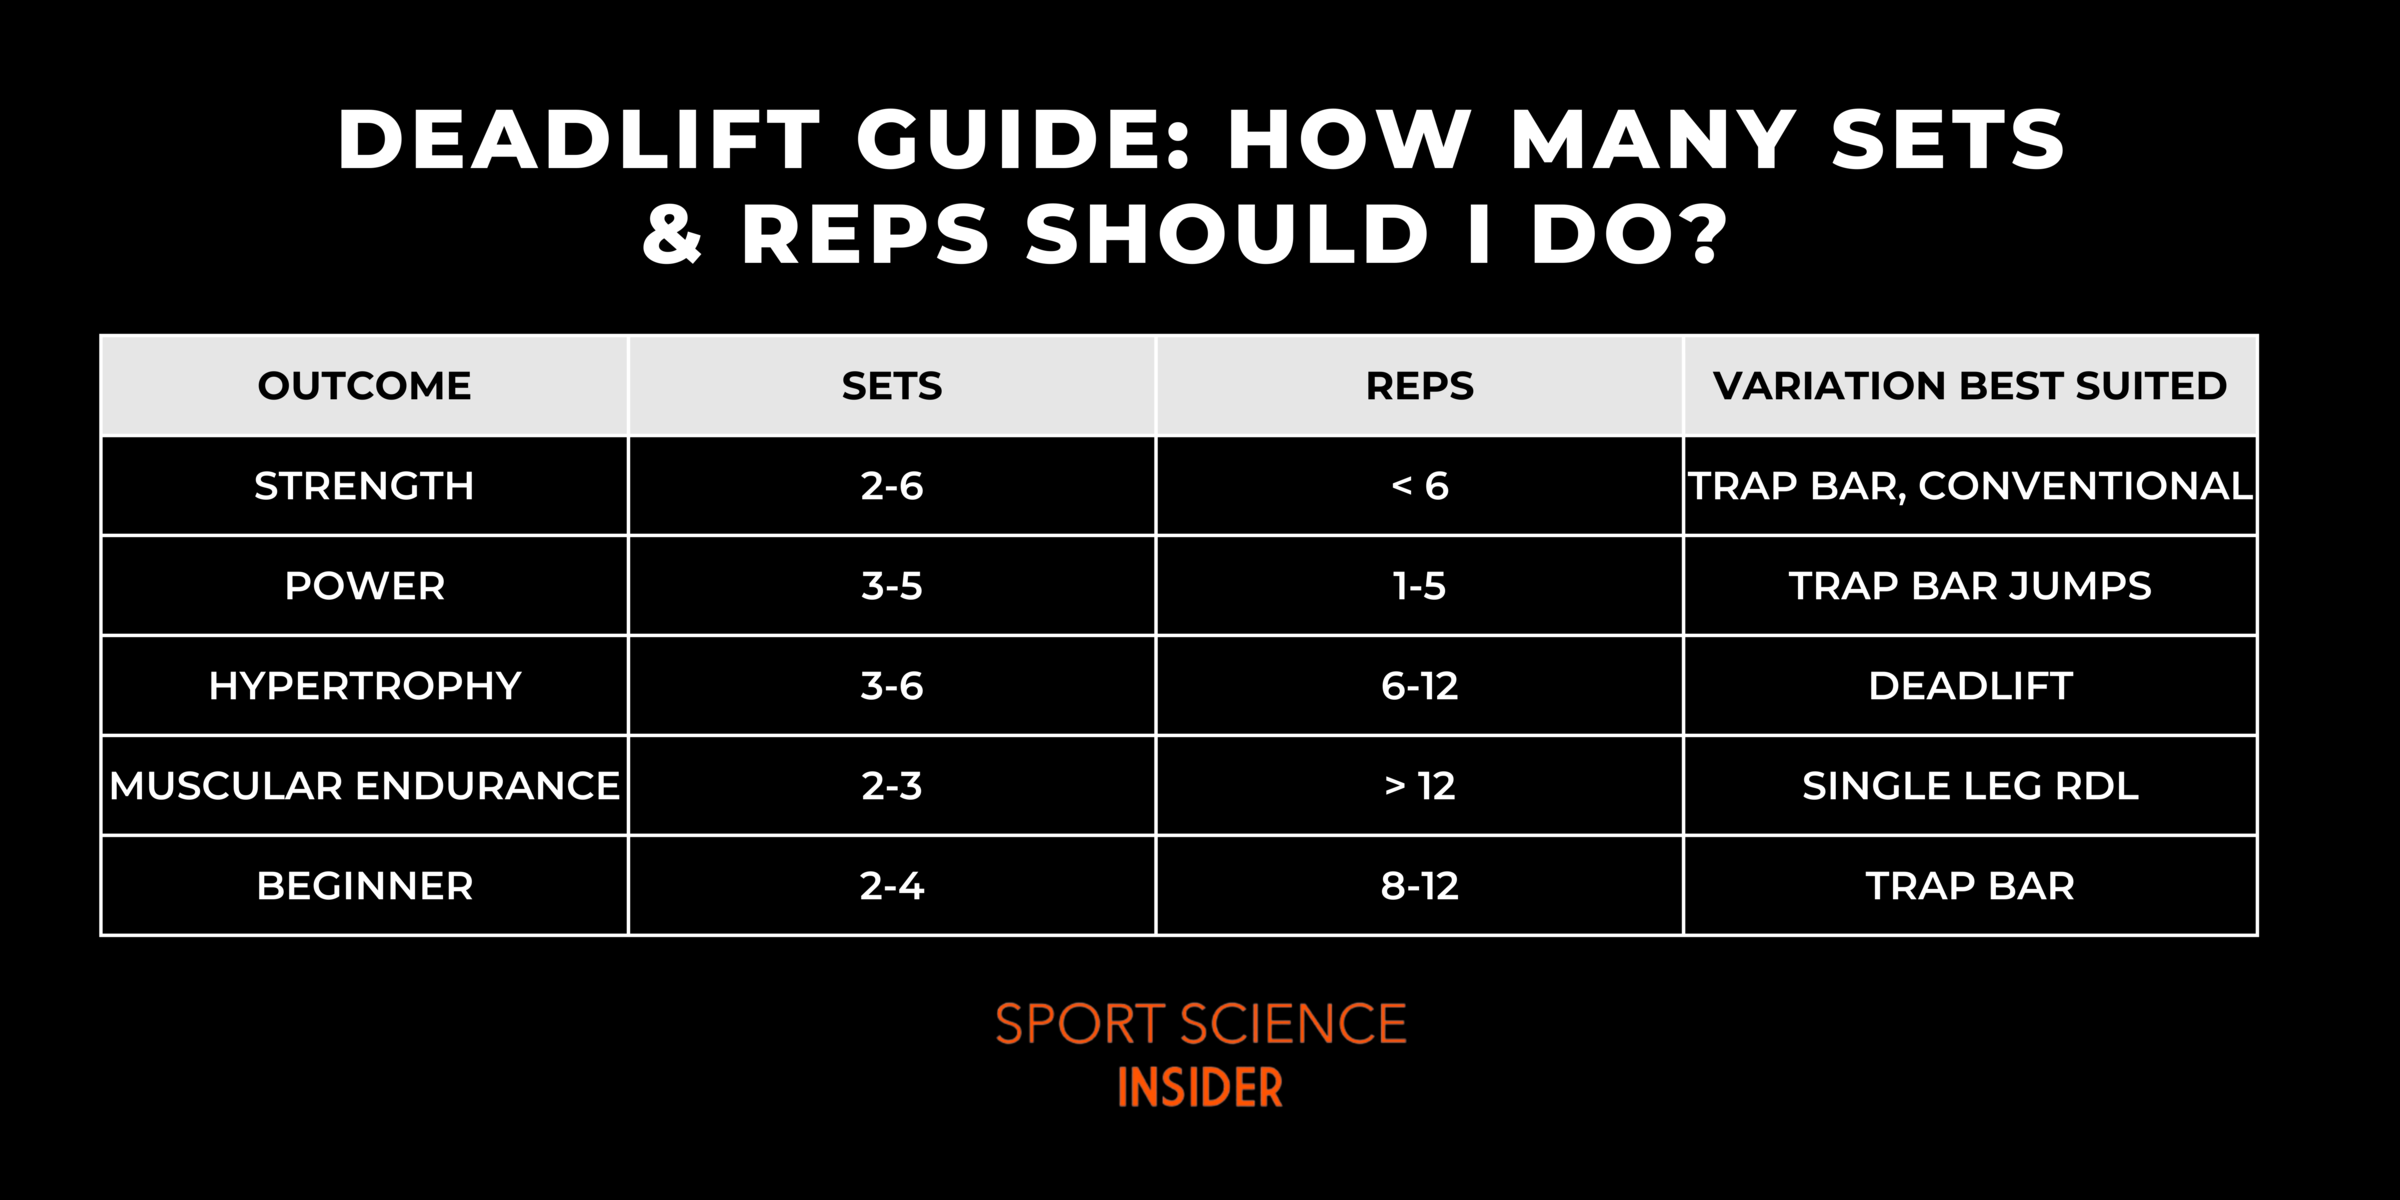 Guide on number of sets and reps to complete for deadlift variations based on training outcome